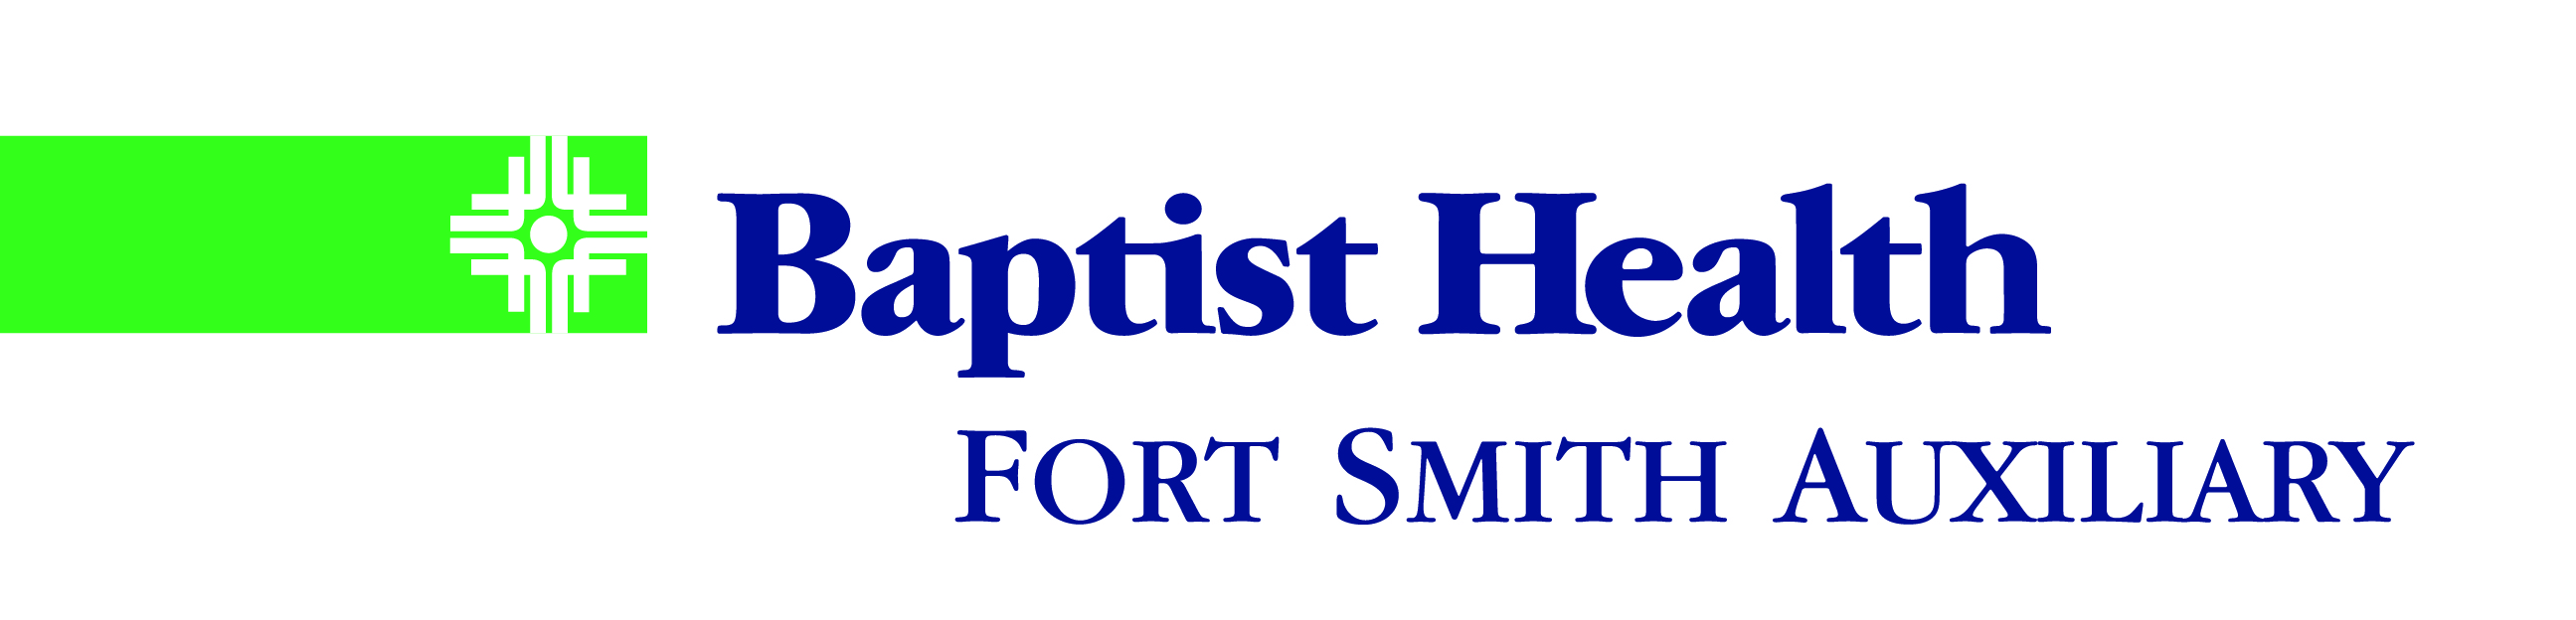 Baptist Health - Fort Smith Auxiliary (Presenting)